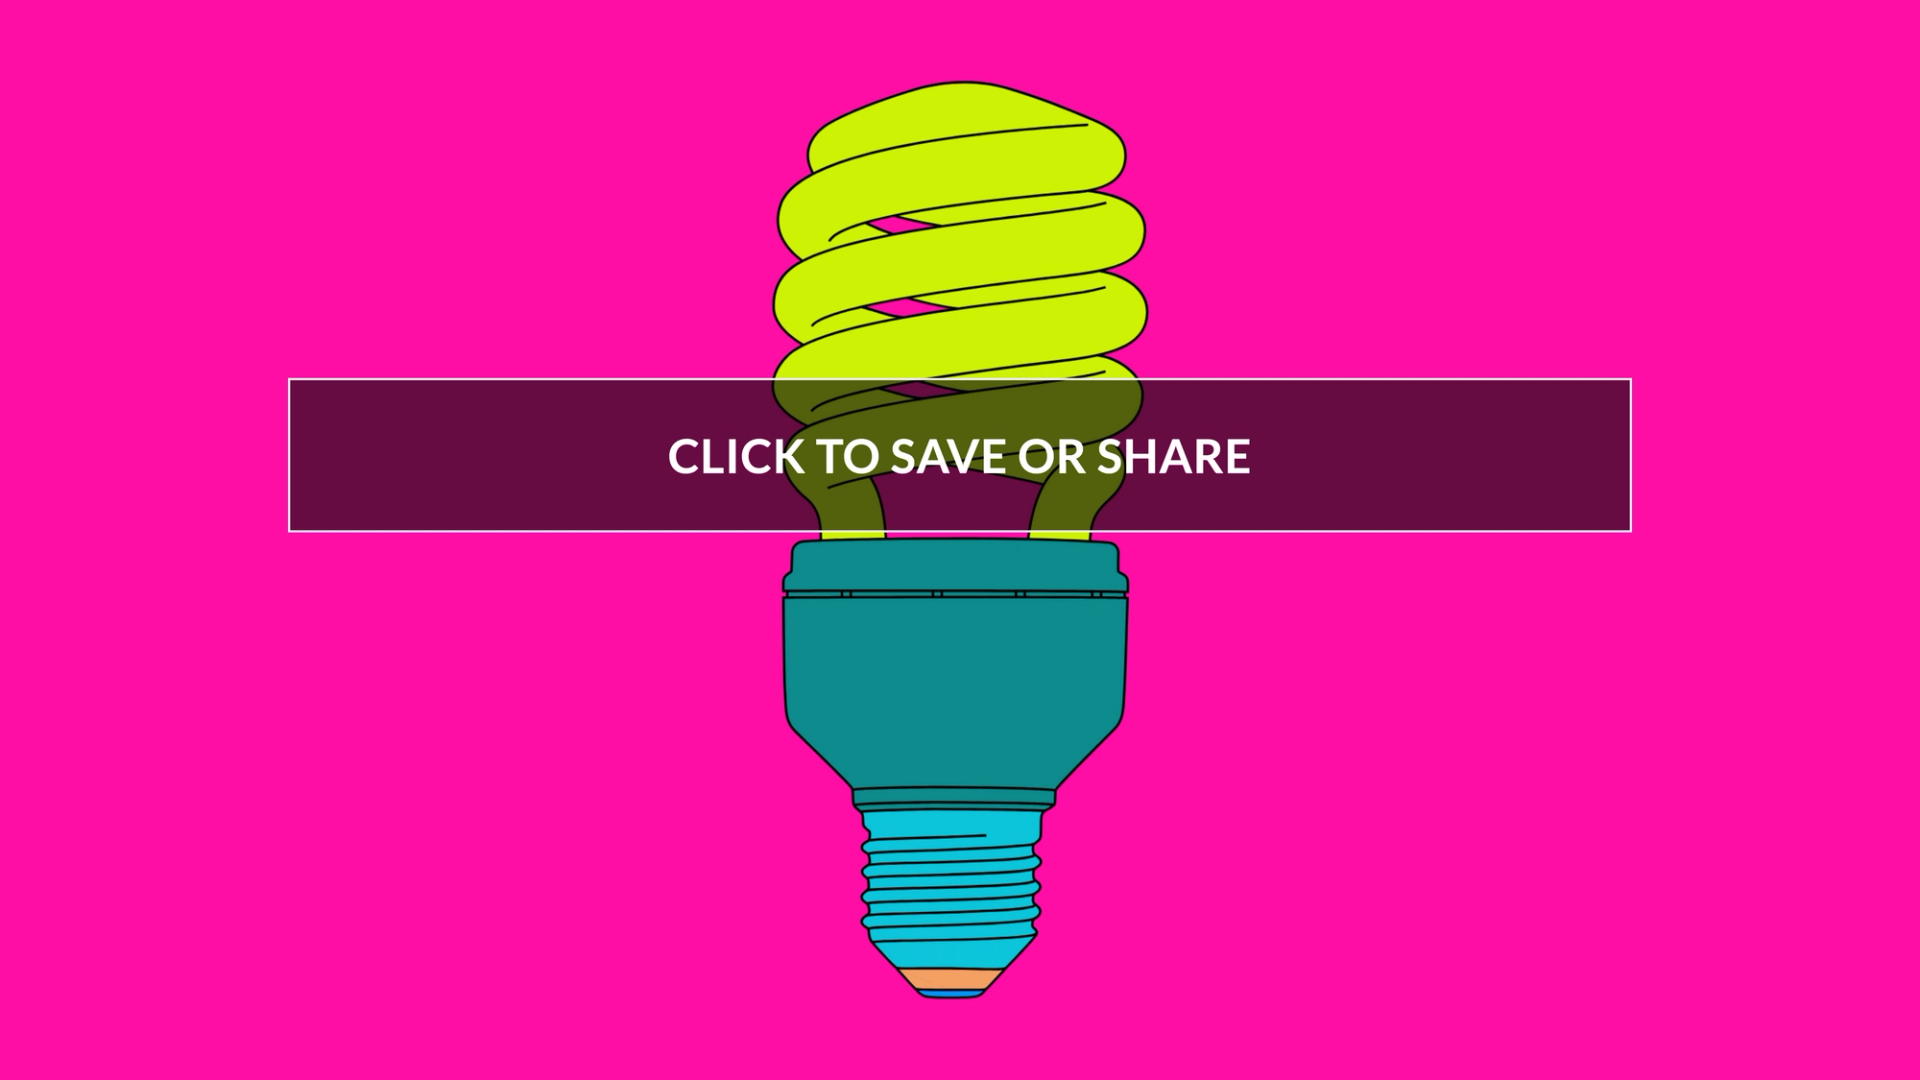 Magenta background with lightbulb and save instructions